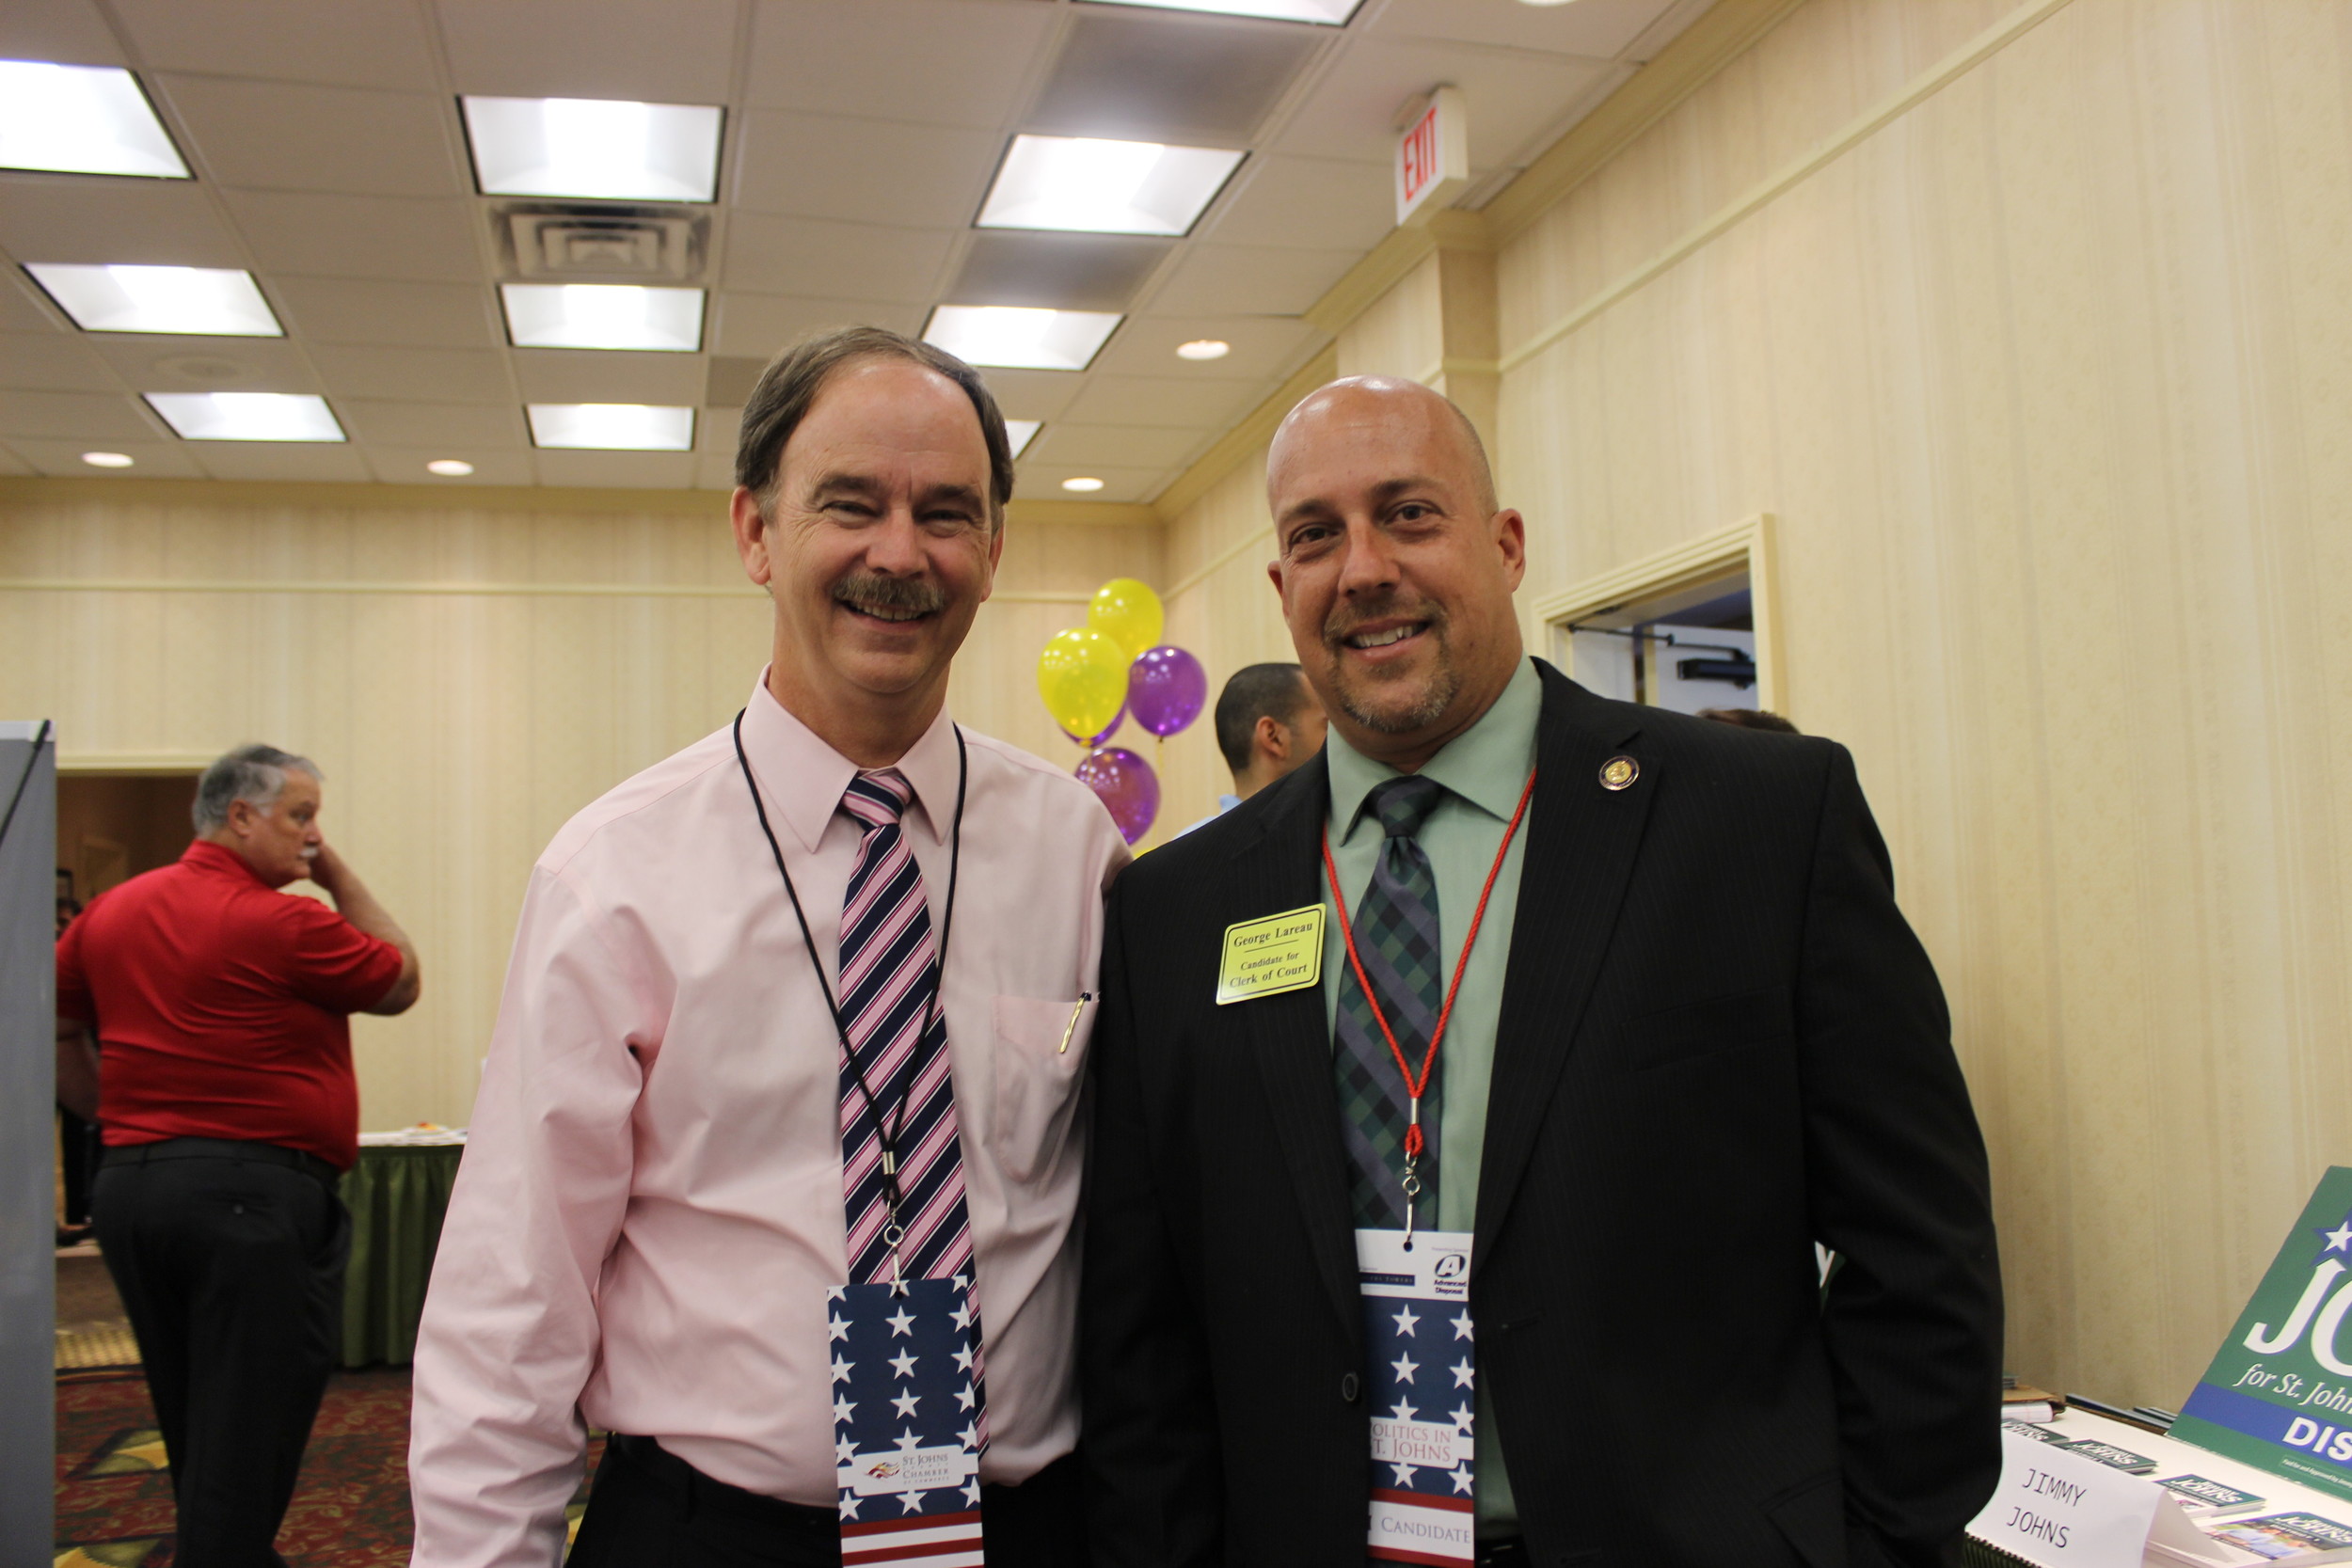 State Rep. and 4th Congressional District Candidate Lake Ray and Clerk of Circuit Court Candidate George Lareau